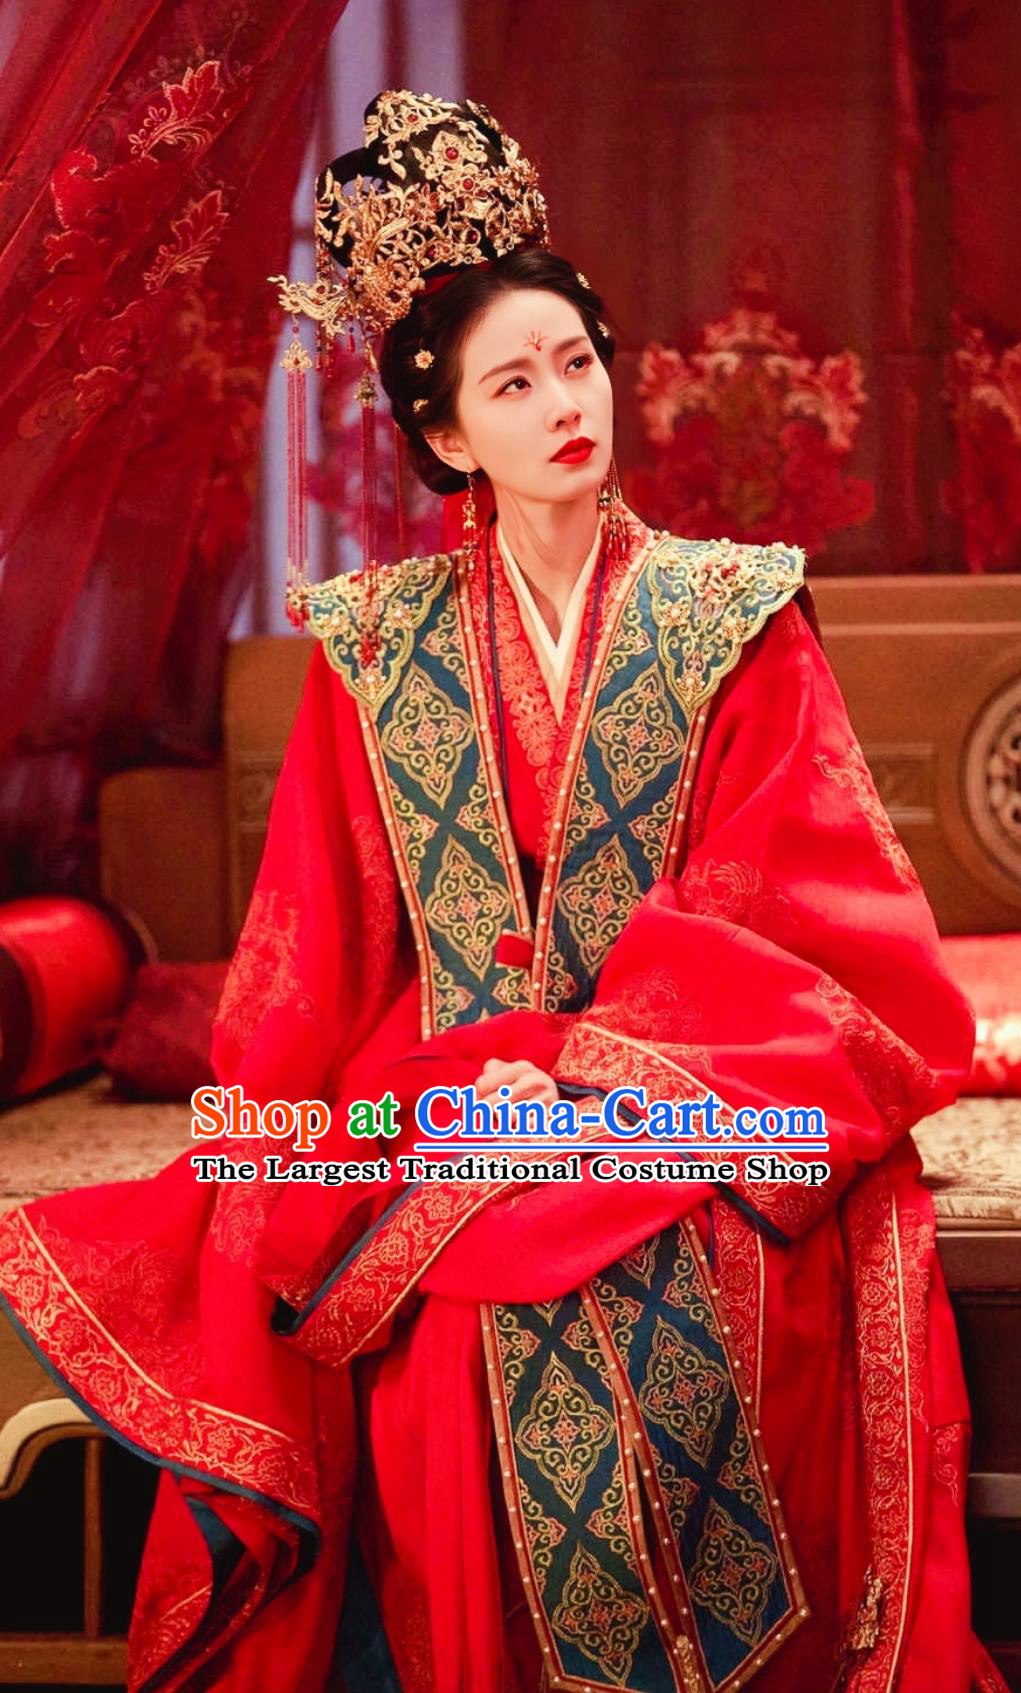 China Traditional Wedding Costume 2023 TV Series A Journey To Love Swordswoman Ren Ru Yi Red Dress Ancient Bride Clothing